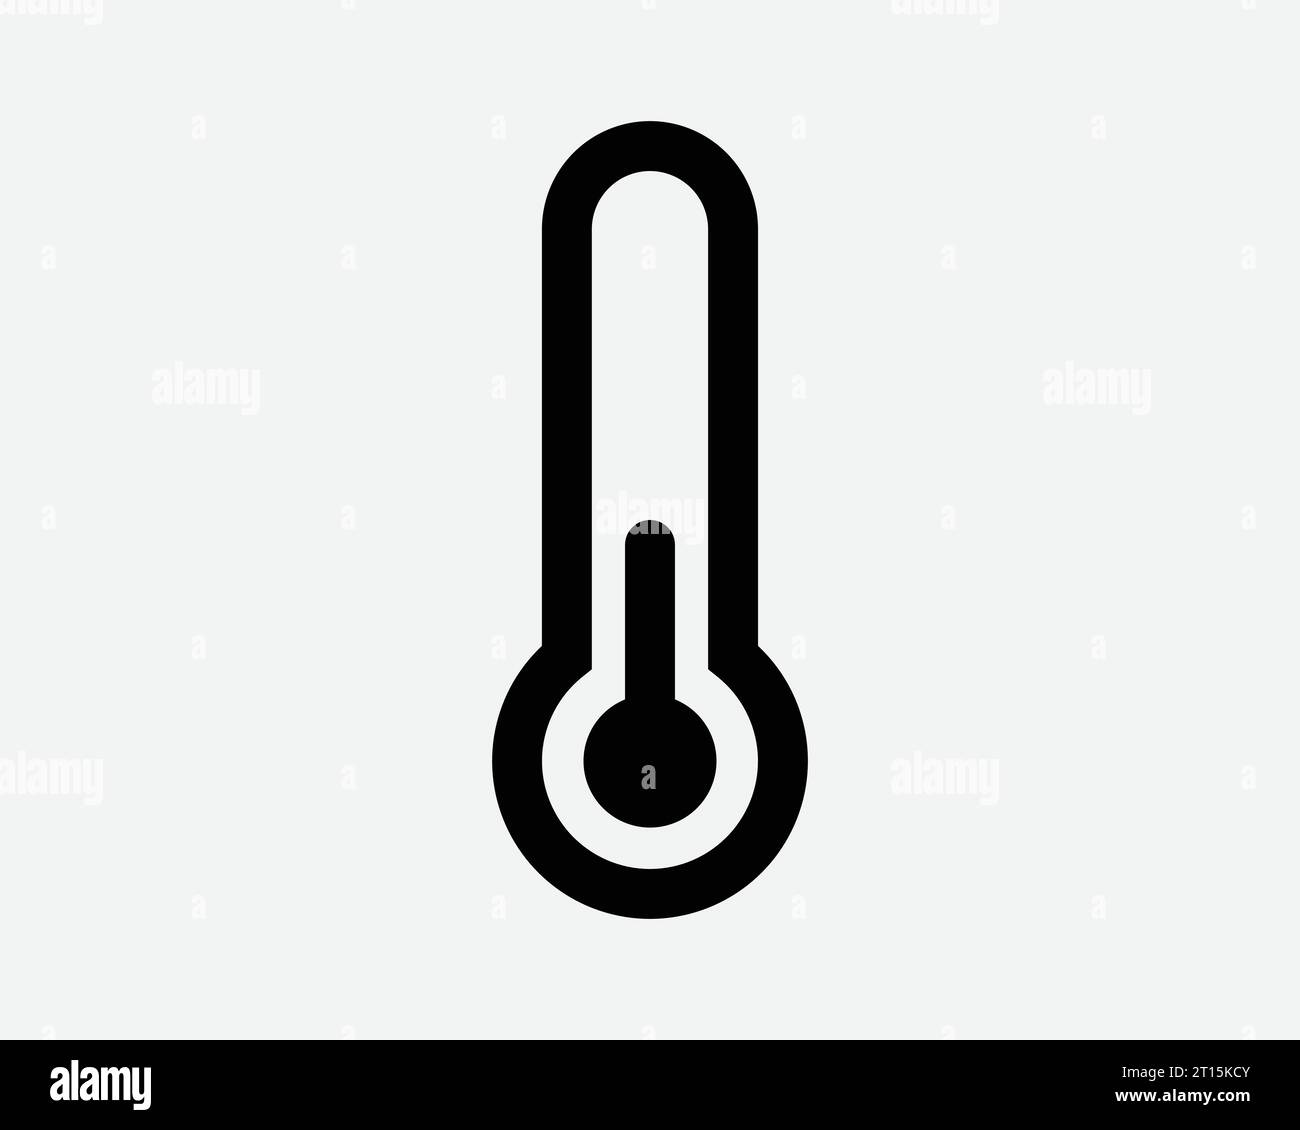 Thermometer Icon Measure Temperature Measurement Test Hot Cold Scale Measuring Tool Medical Black White Shape Line Outline Sign Symbol EPS Vector Stock Vector